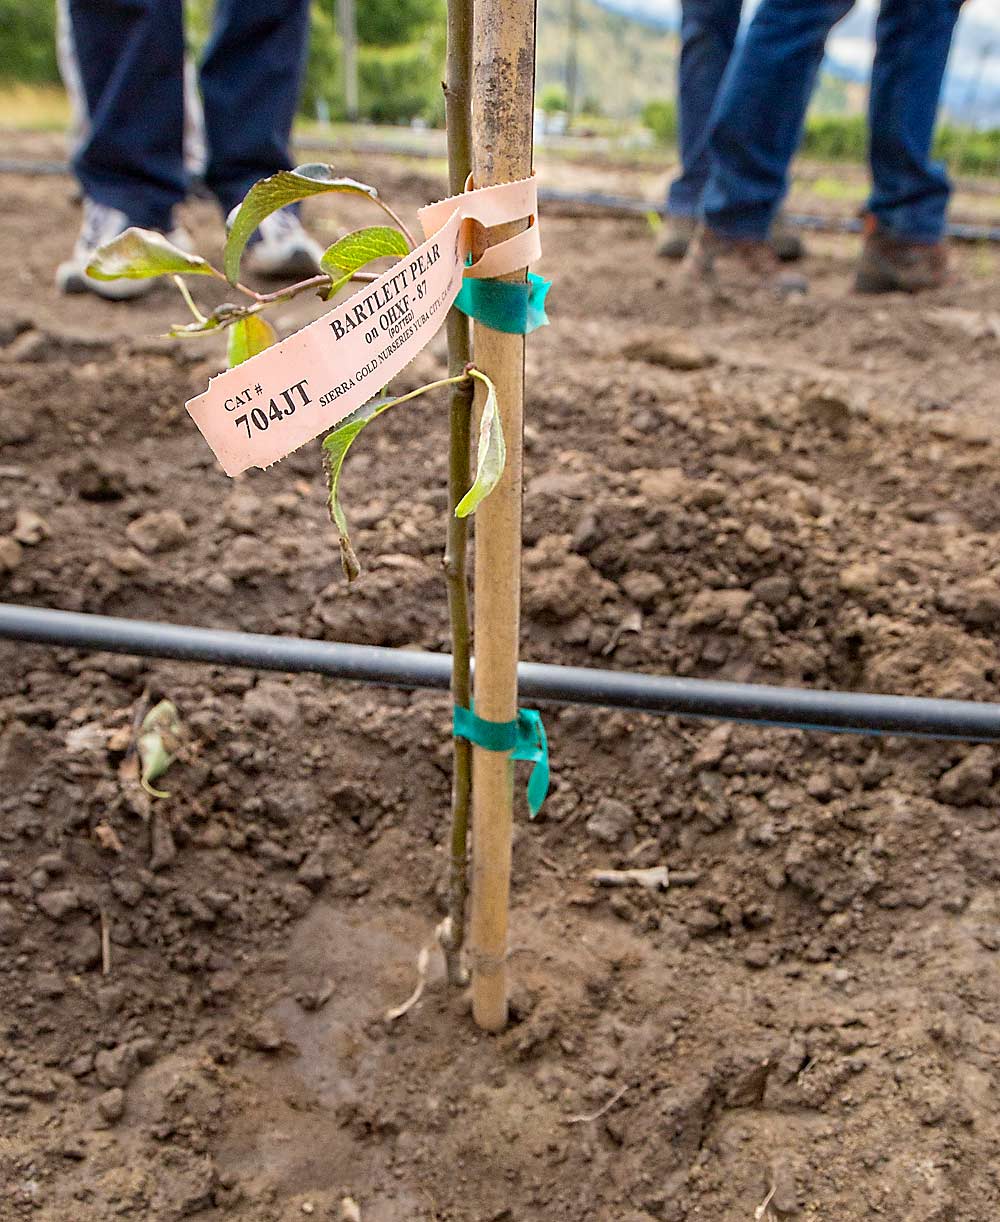 One of the container-grown pear trees in Einhorn’s tests in Wenatchee, Washington, in 2017, as indicated by the “potted” notation on the label. (TJ Mullinax/Good Fruit Grower)